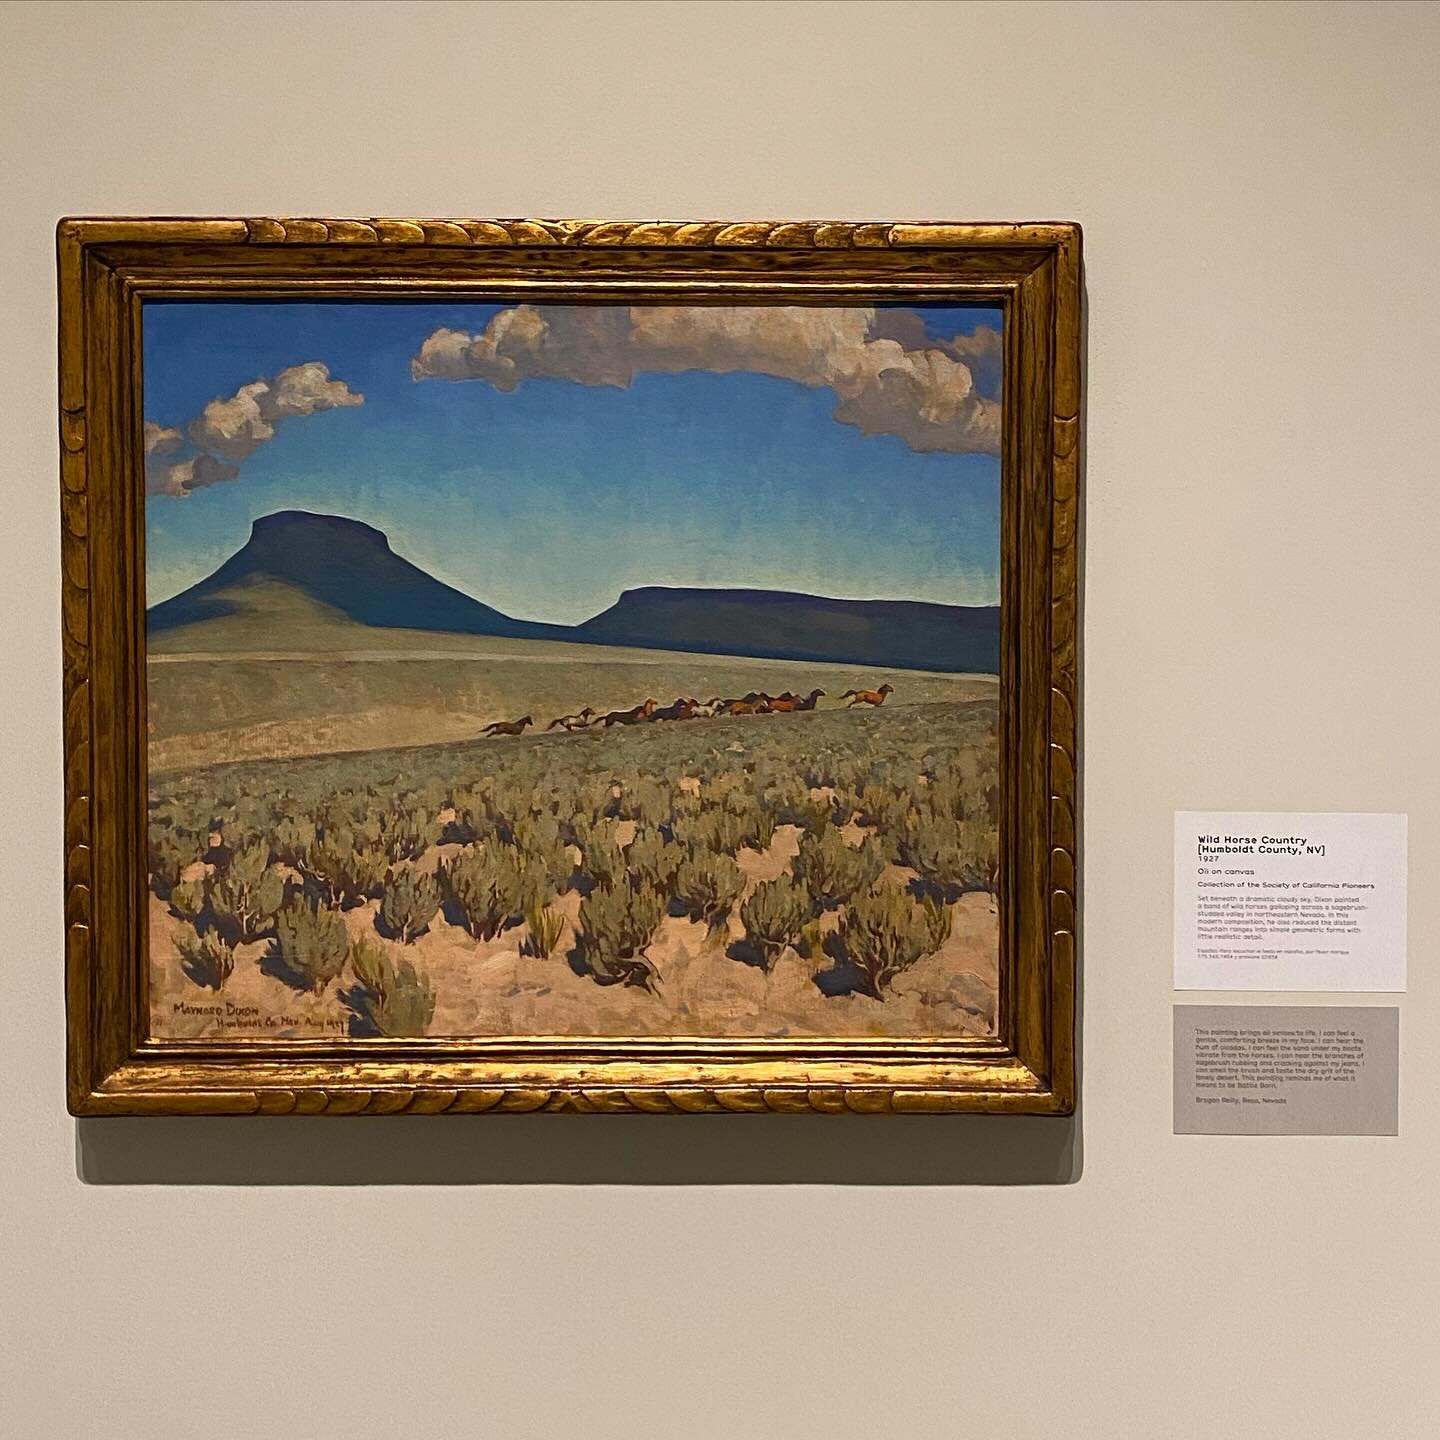 My mom took me out for an evening in my hometown. We visited @nevadaart exhibits: 

Sagebrush and Solitude: Maynard Dixon in Nevada
and, End of the Range: Charlotte Skinner in the Eastern Sierra

Maynard&rsquo;s poems caught my attention, as well as 